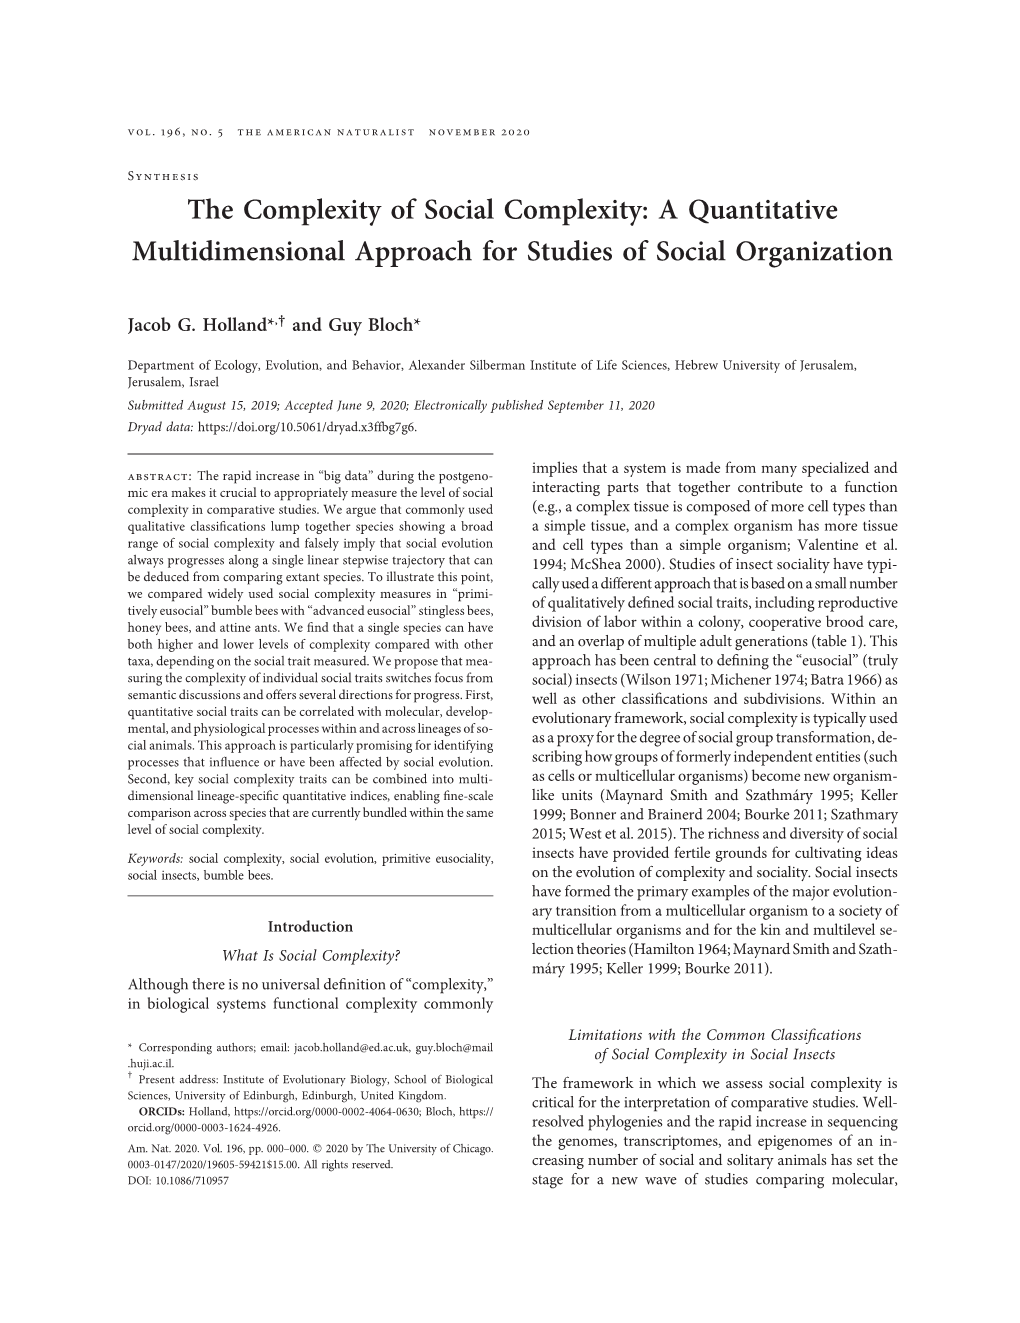 The Complexity of Social Complexity: a Quantitative Multidimensional Approach for Studies of Social Organization